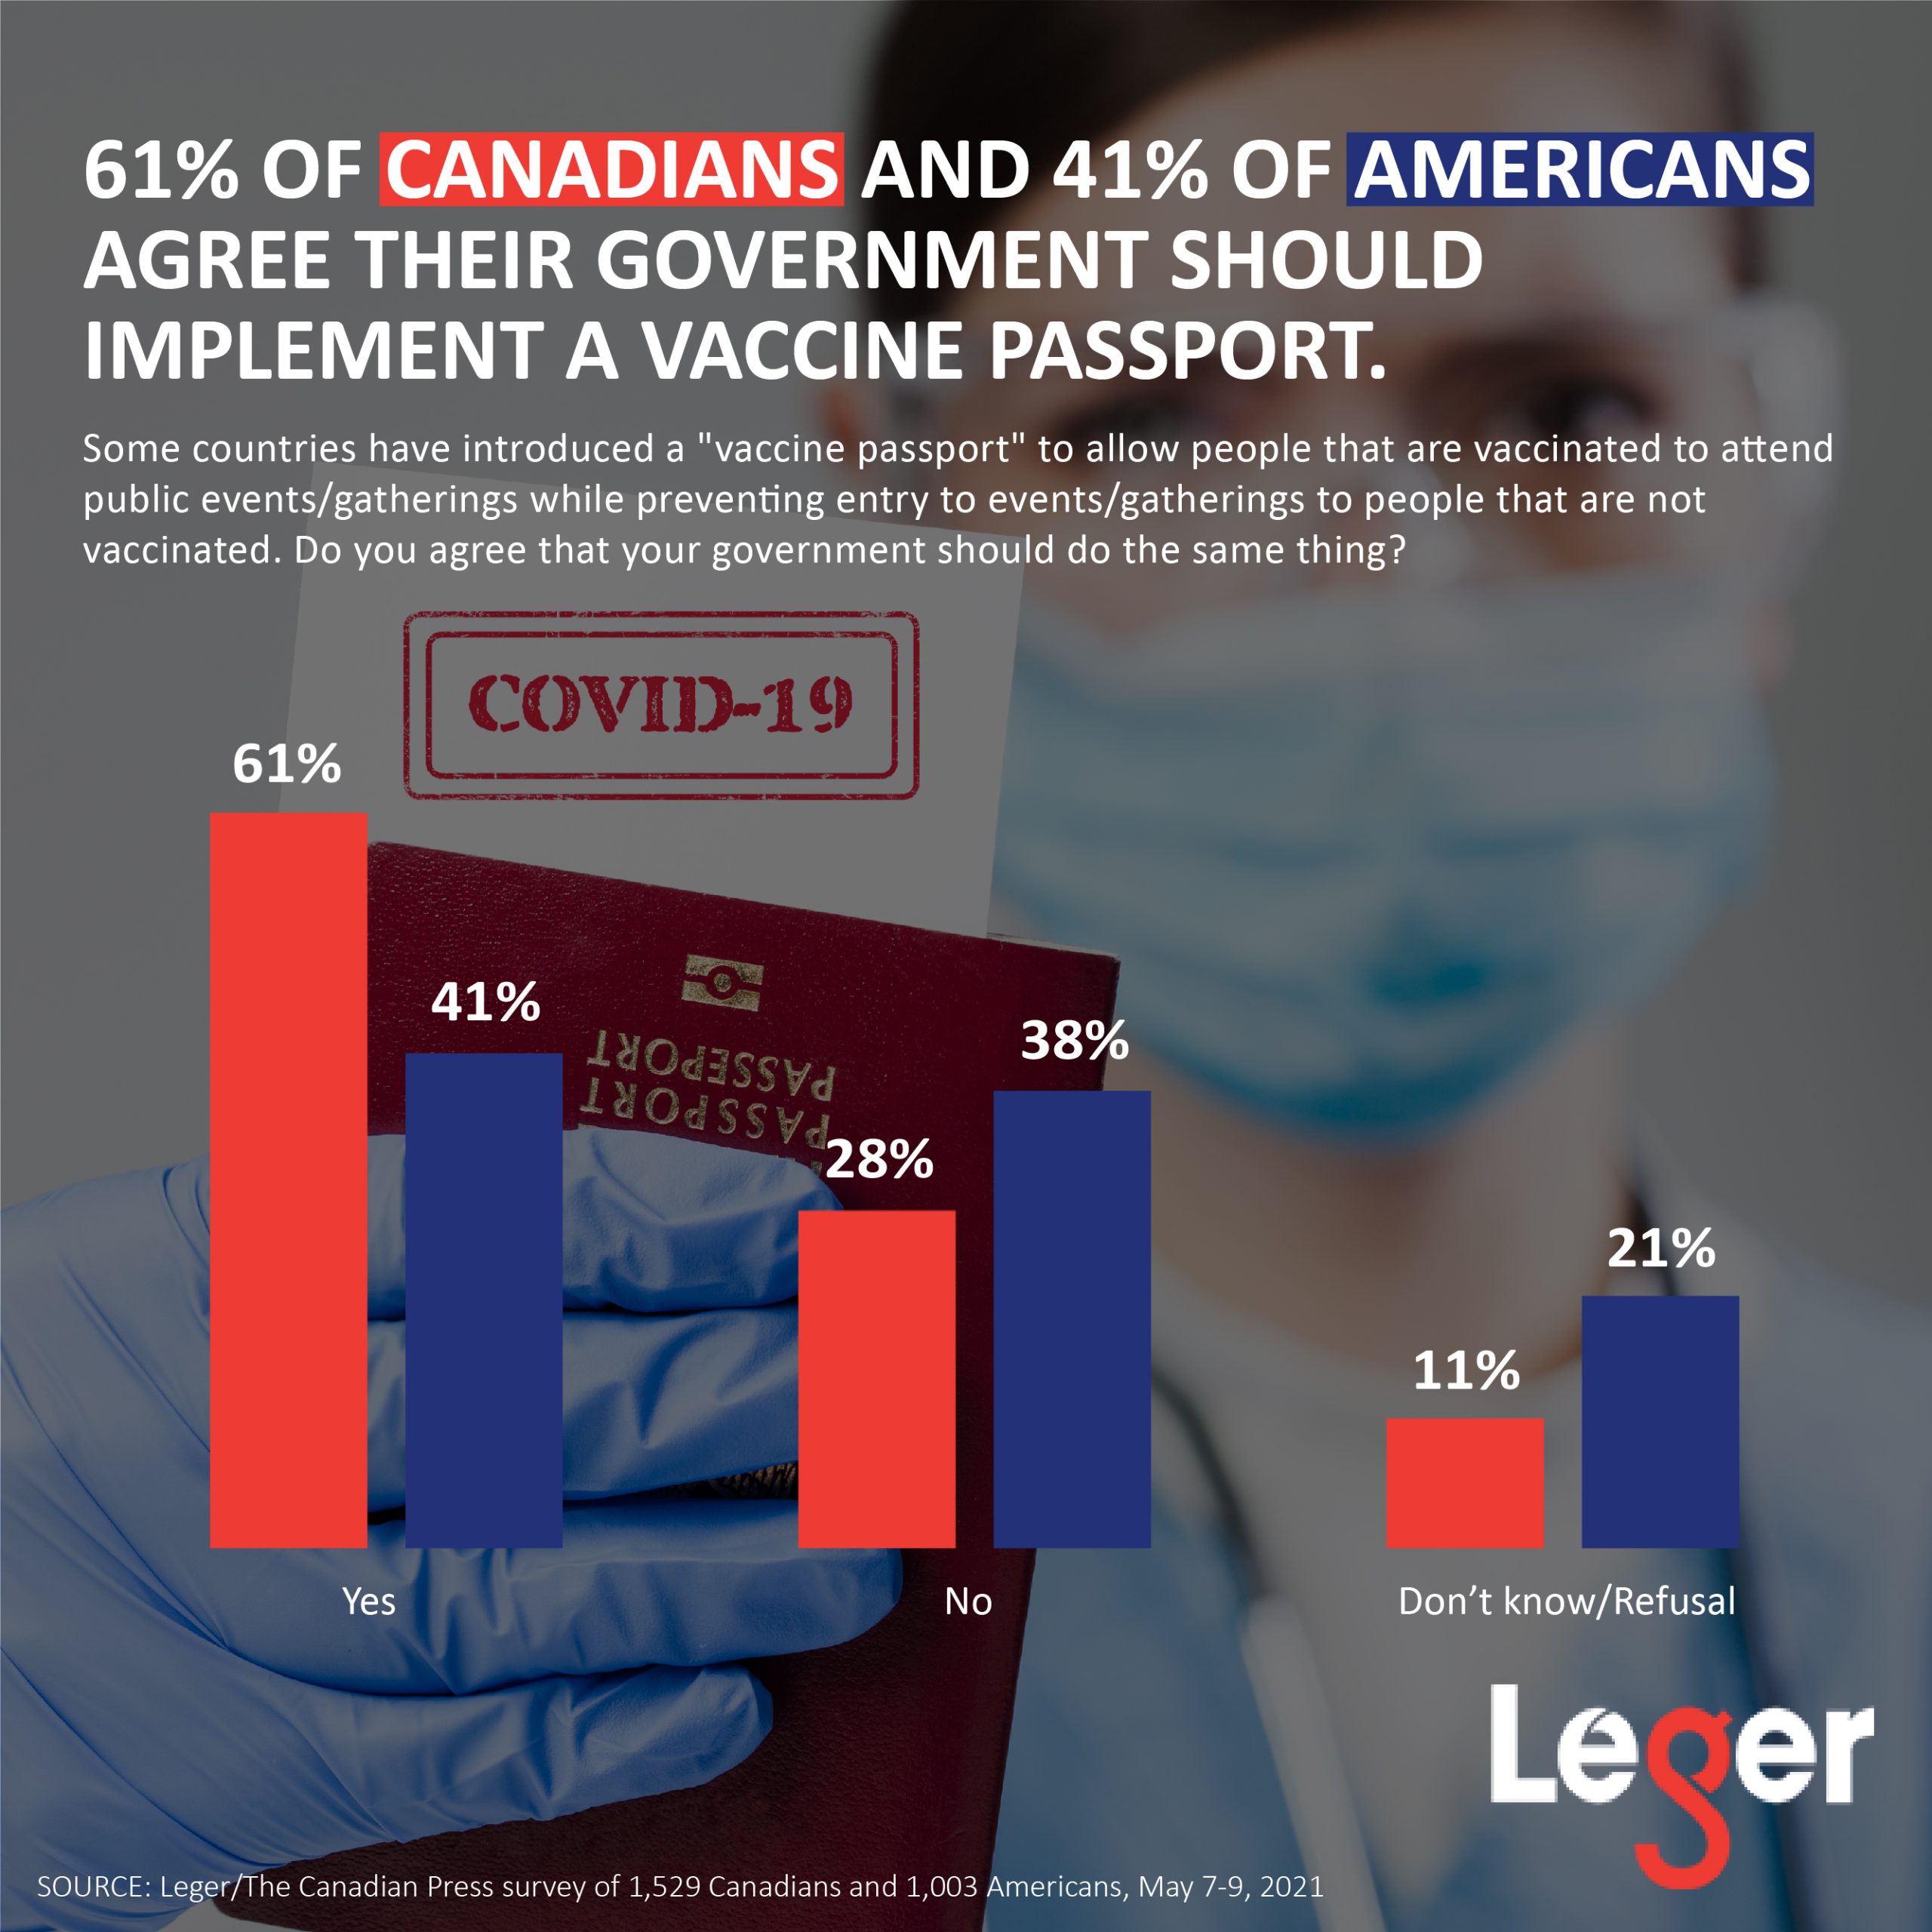 61% of Canadians and 41% of Americans agree their government should implement a vaccine passport.